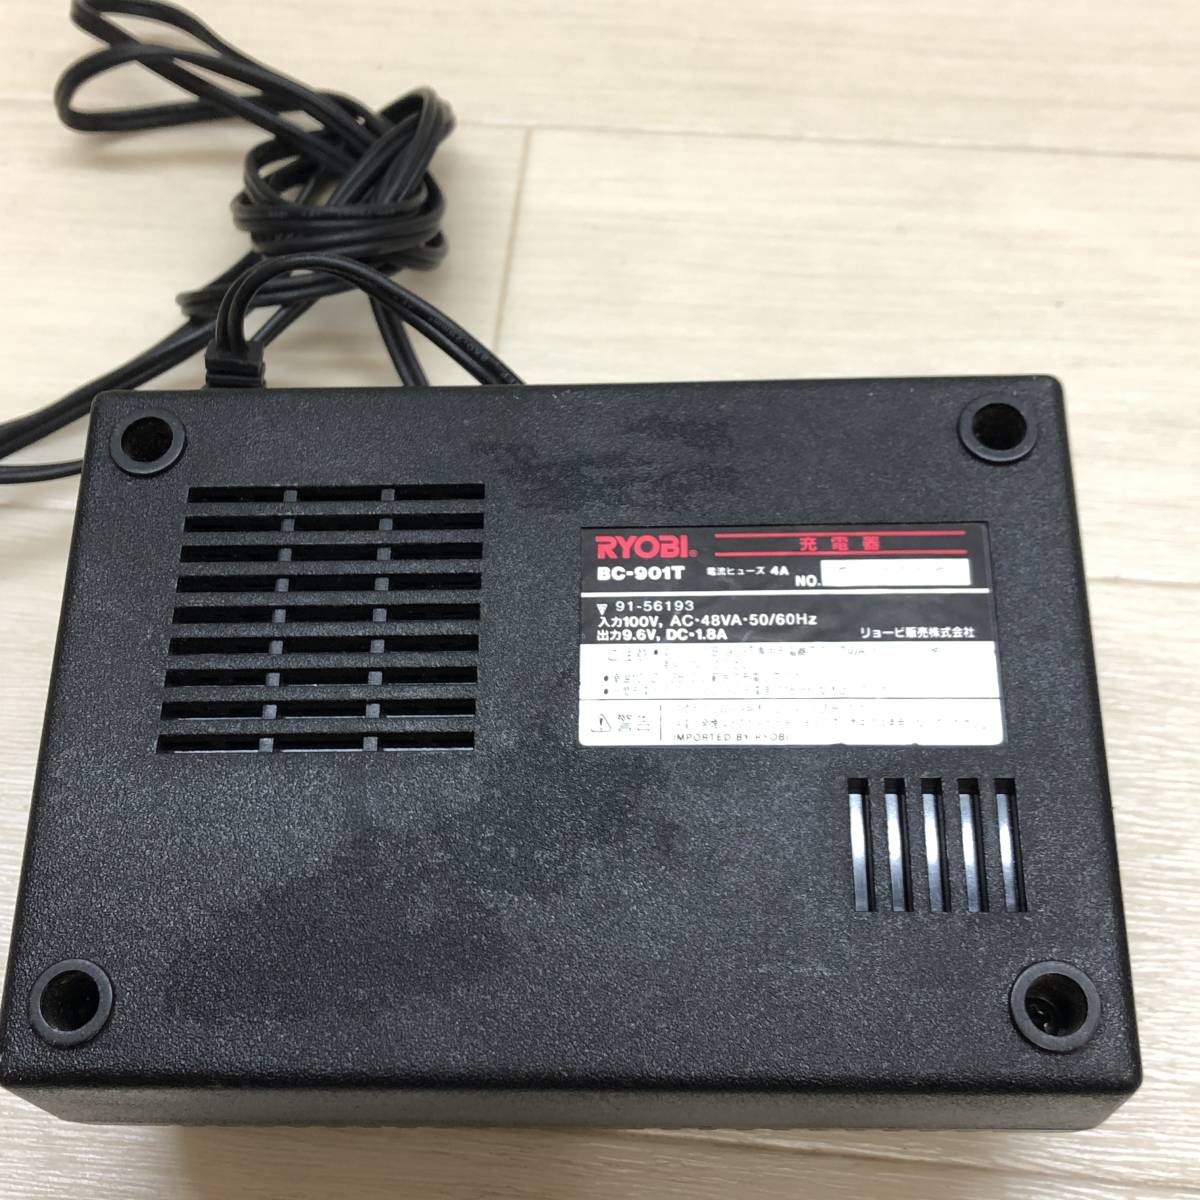 ^ RYOBI Ryobi charger battery pack BC-901T B-903T battery charger electrification only verification tool junk ^C72449